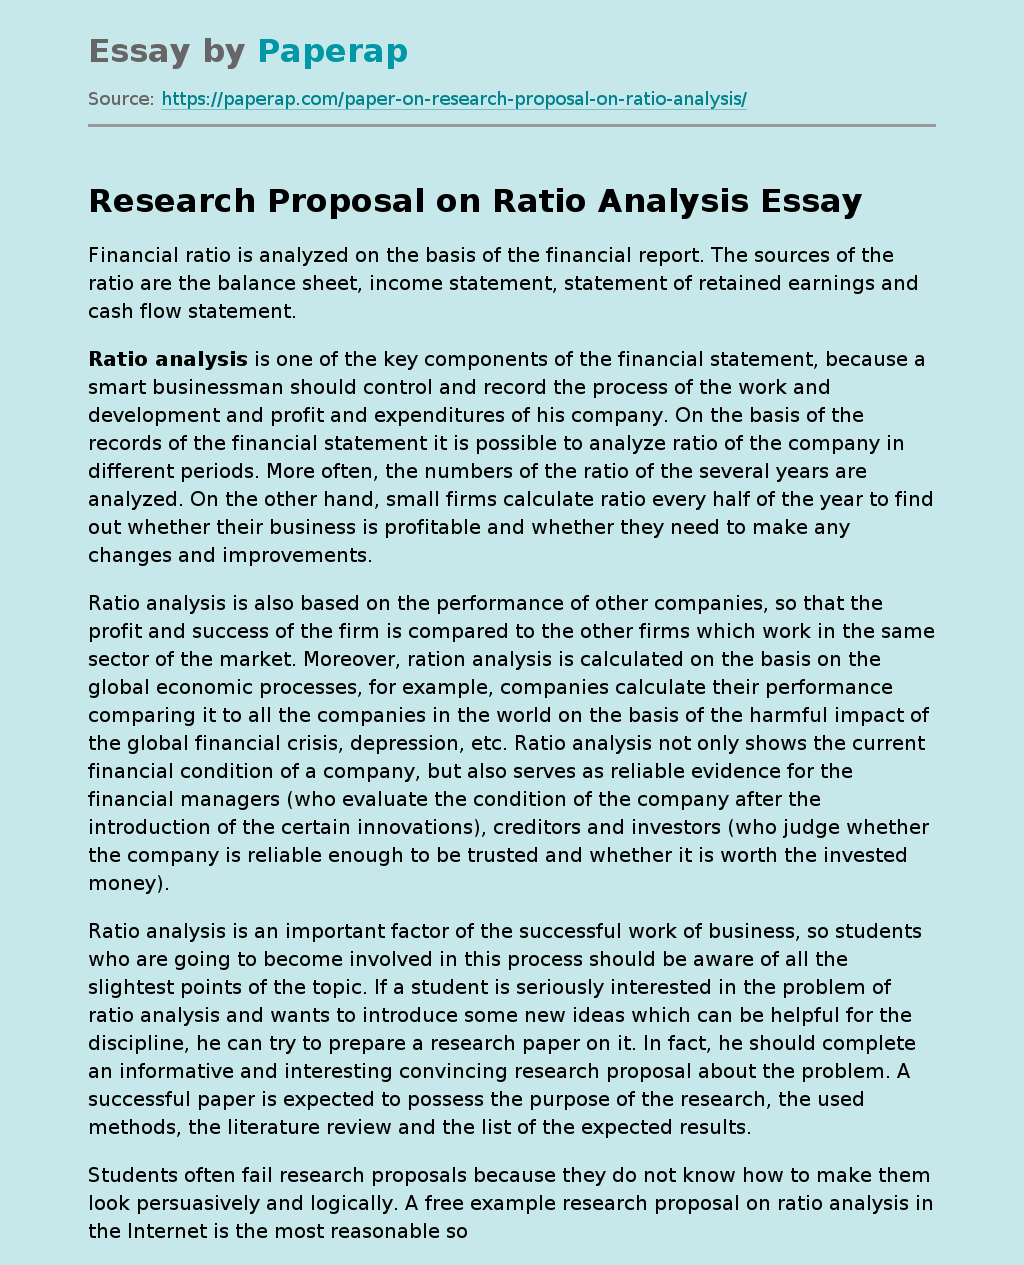 Research Proposal on Ratio Analysis